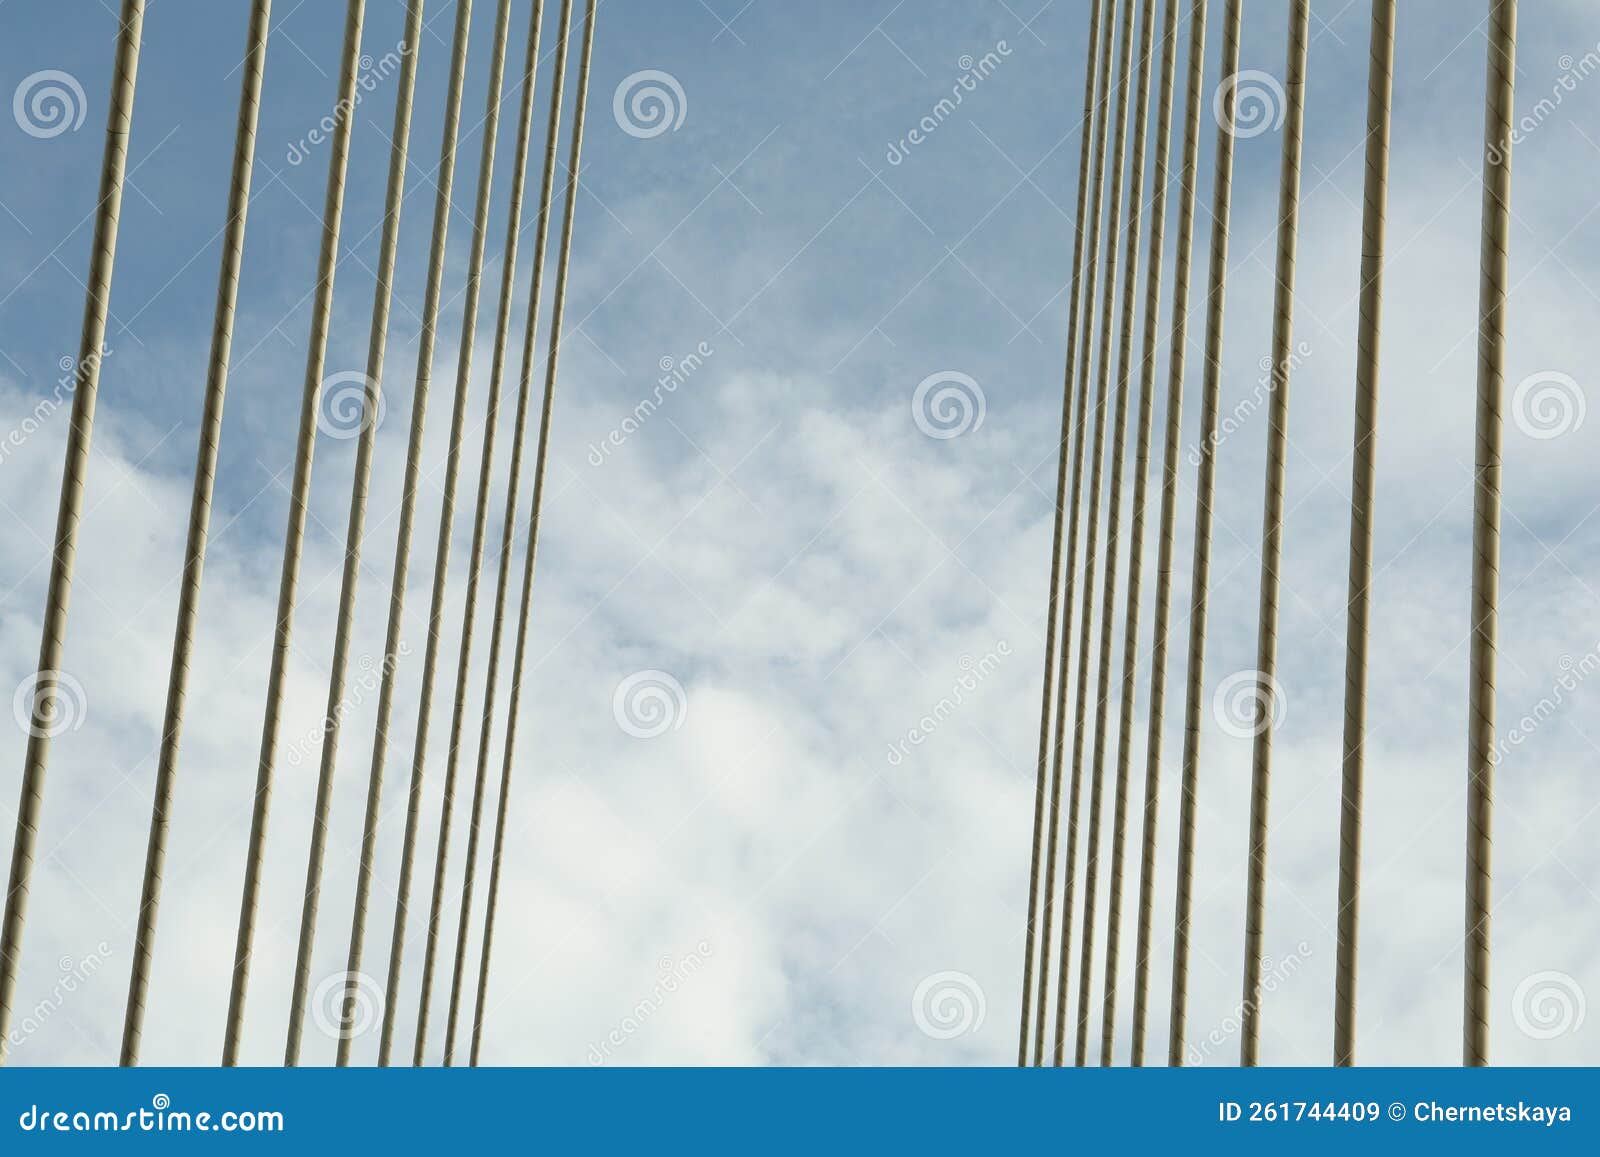 modern bridge cables against blue sky, low angle view